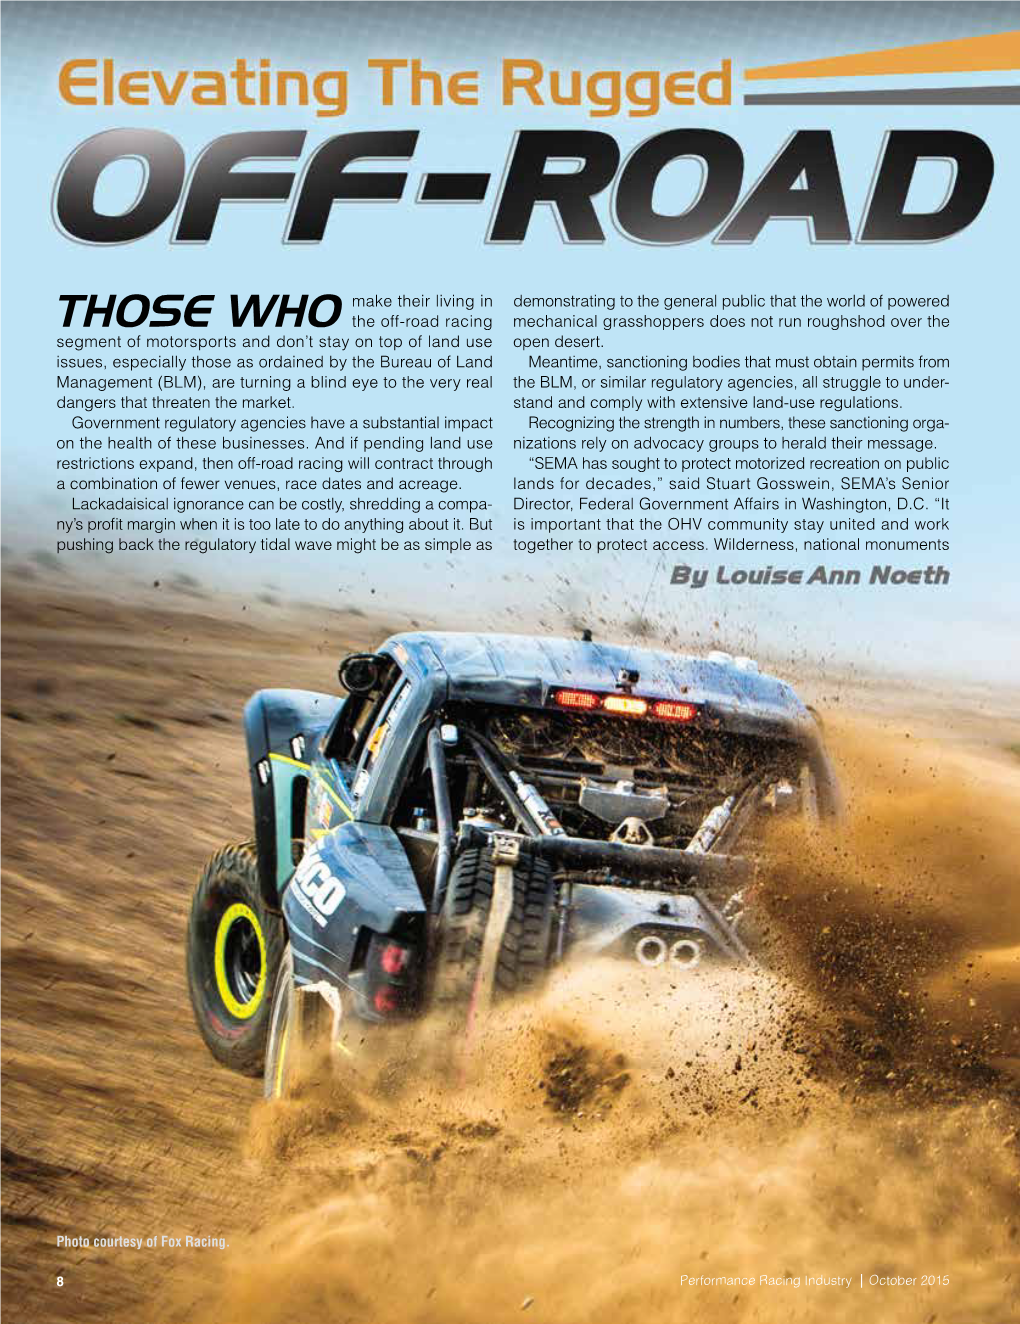 THOSE WHO Make Their Living in the Off-Road Racing Segment Of